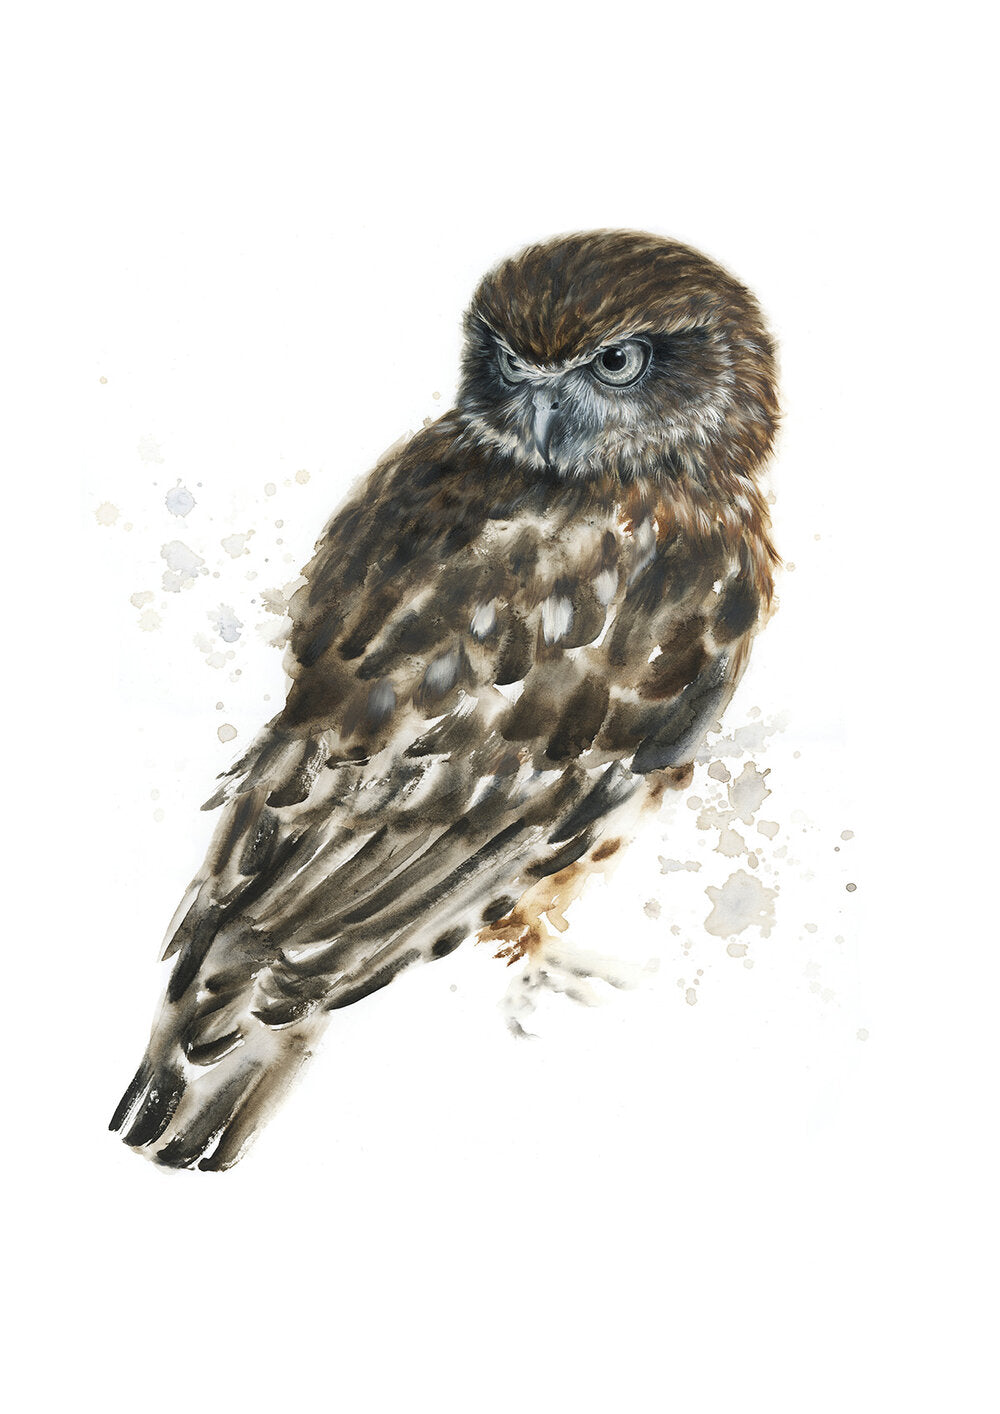 Boobook Owl #1 - Limited Edition Print